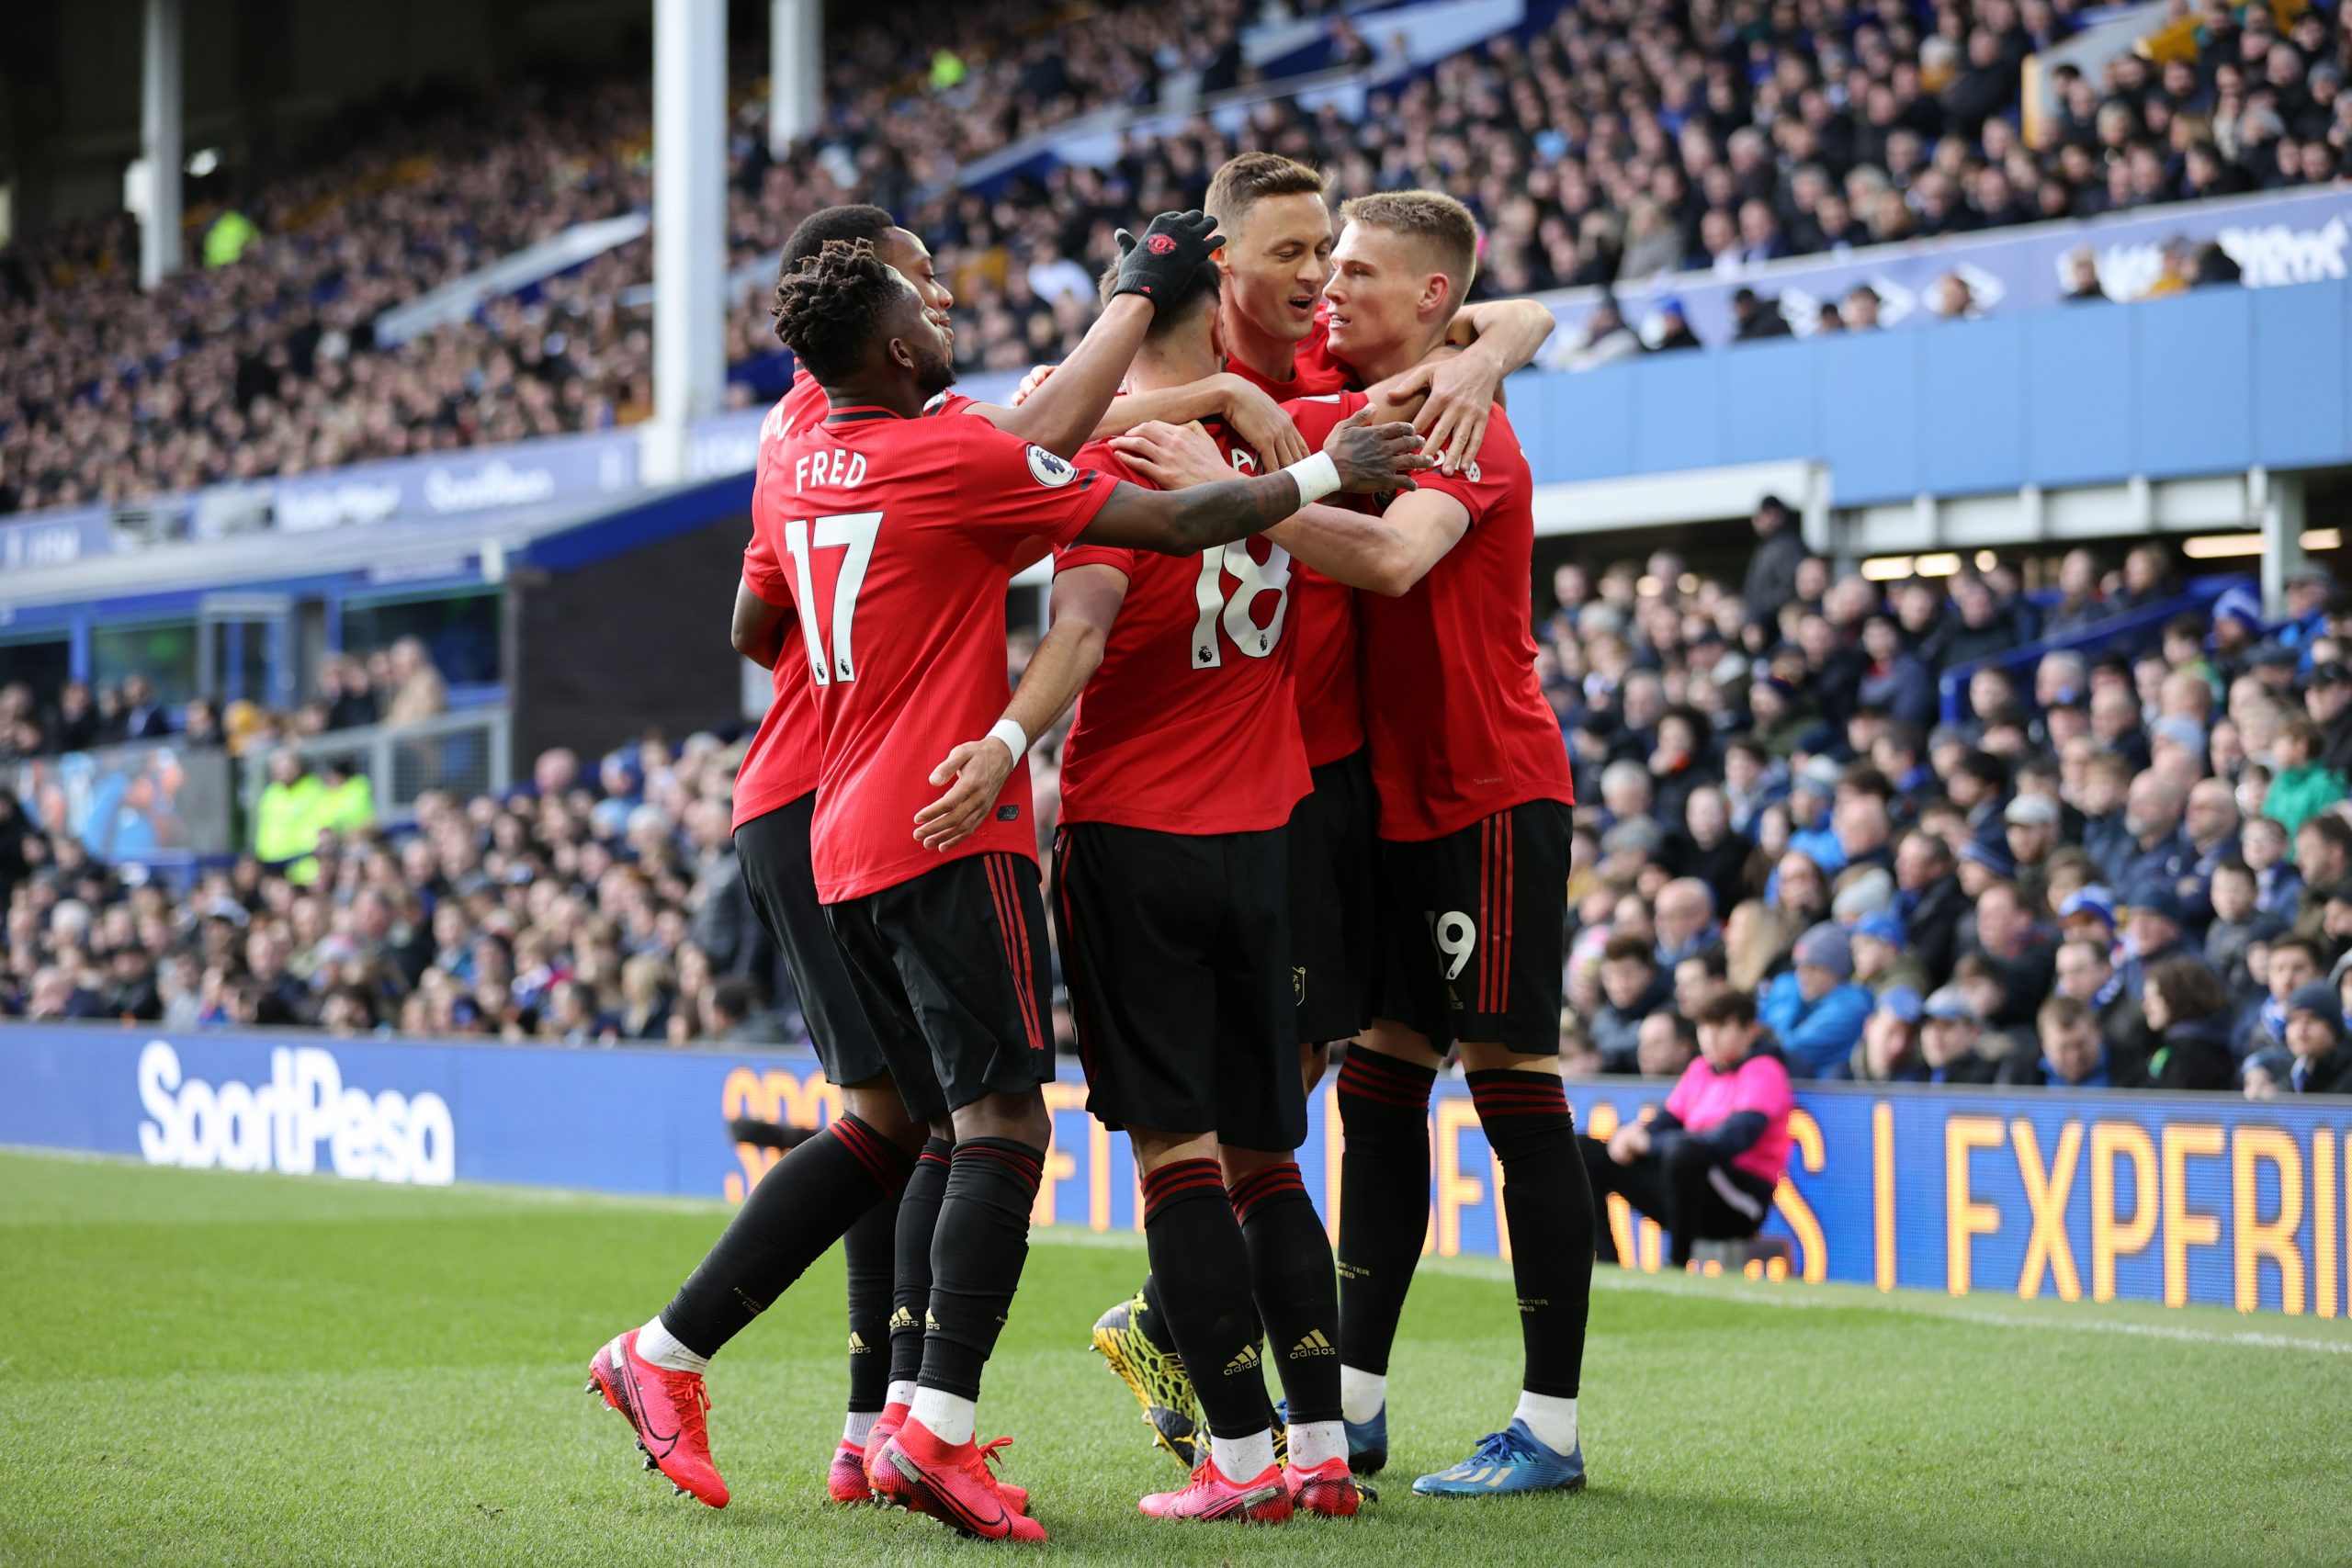 Manchester United players celebrate after scoring against Everton. (Getty Images)